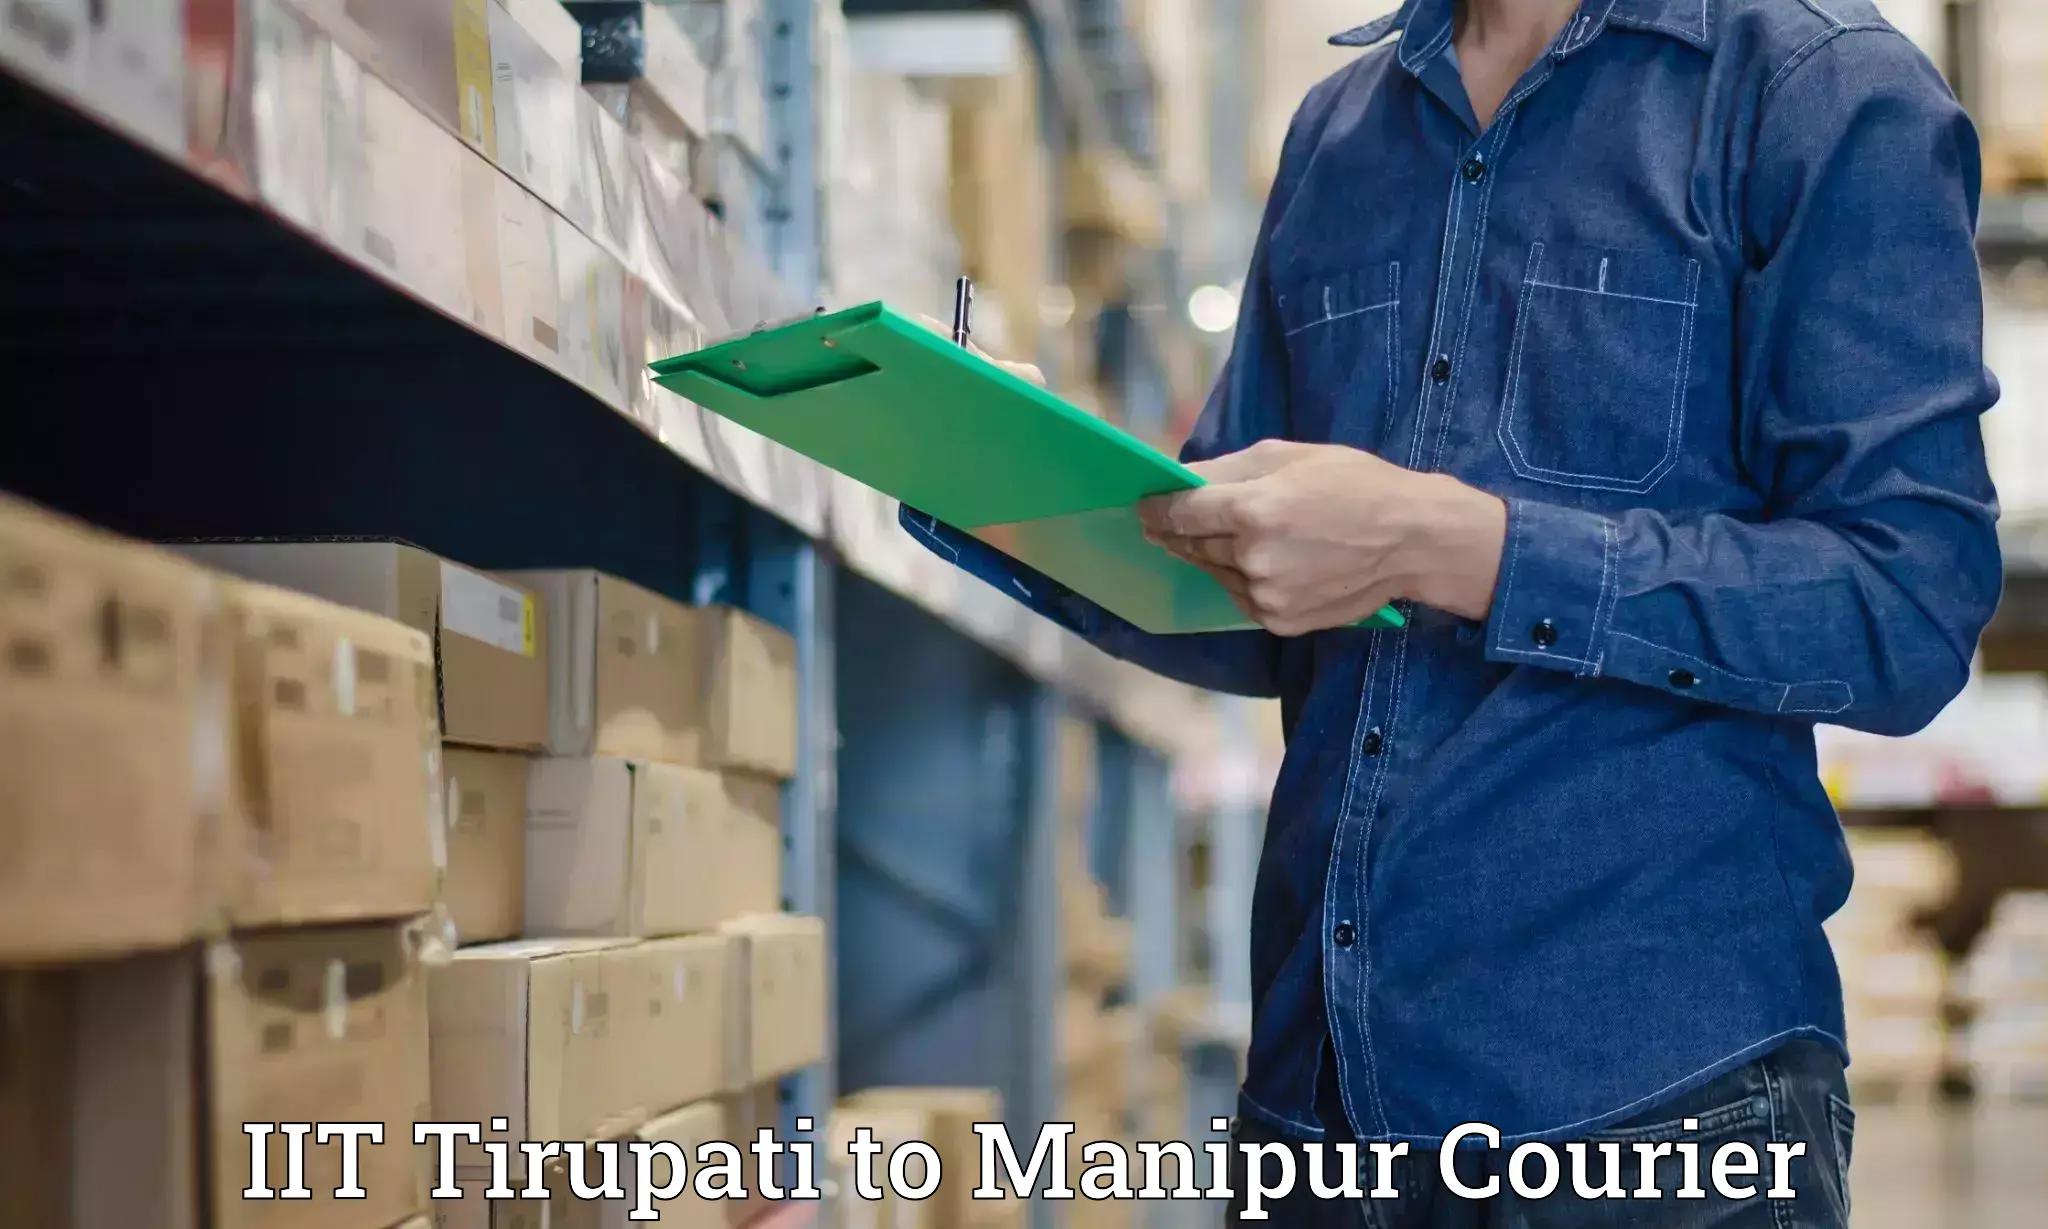 Cargo courier service IIT Tirupati to Imphal